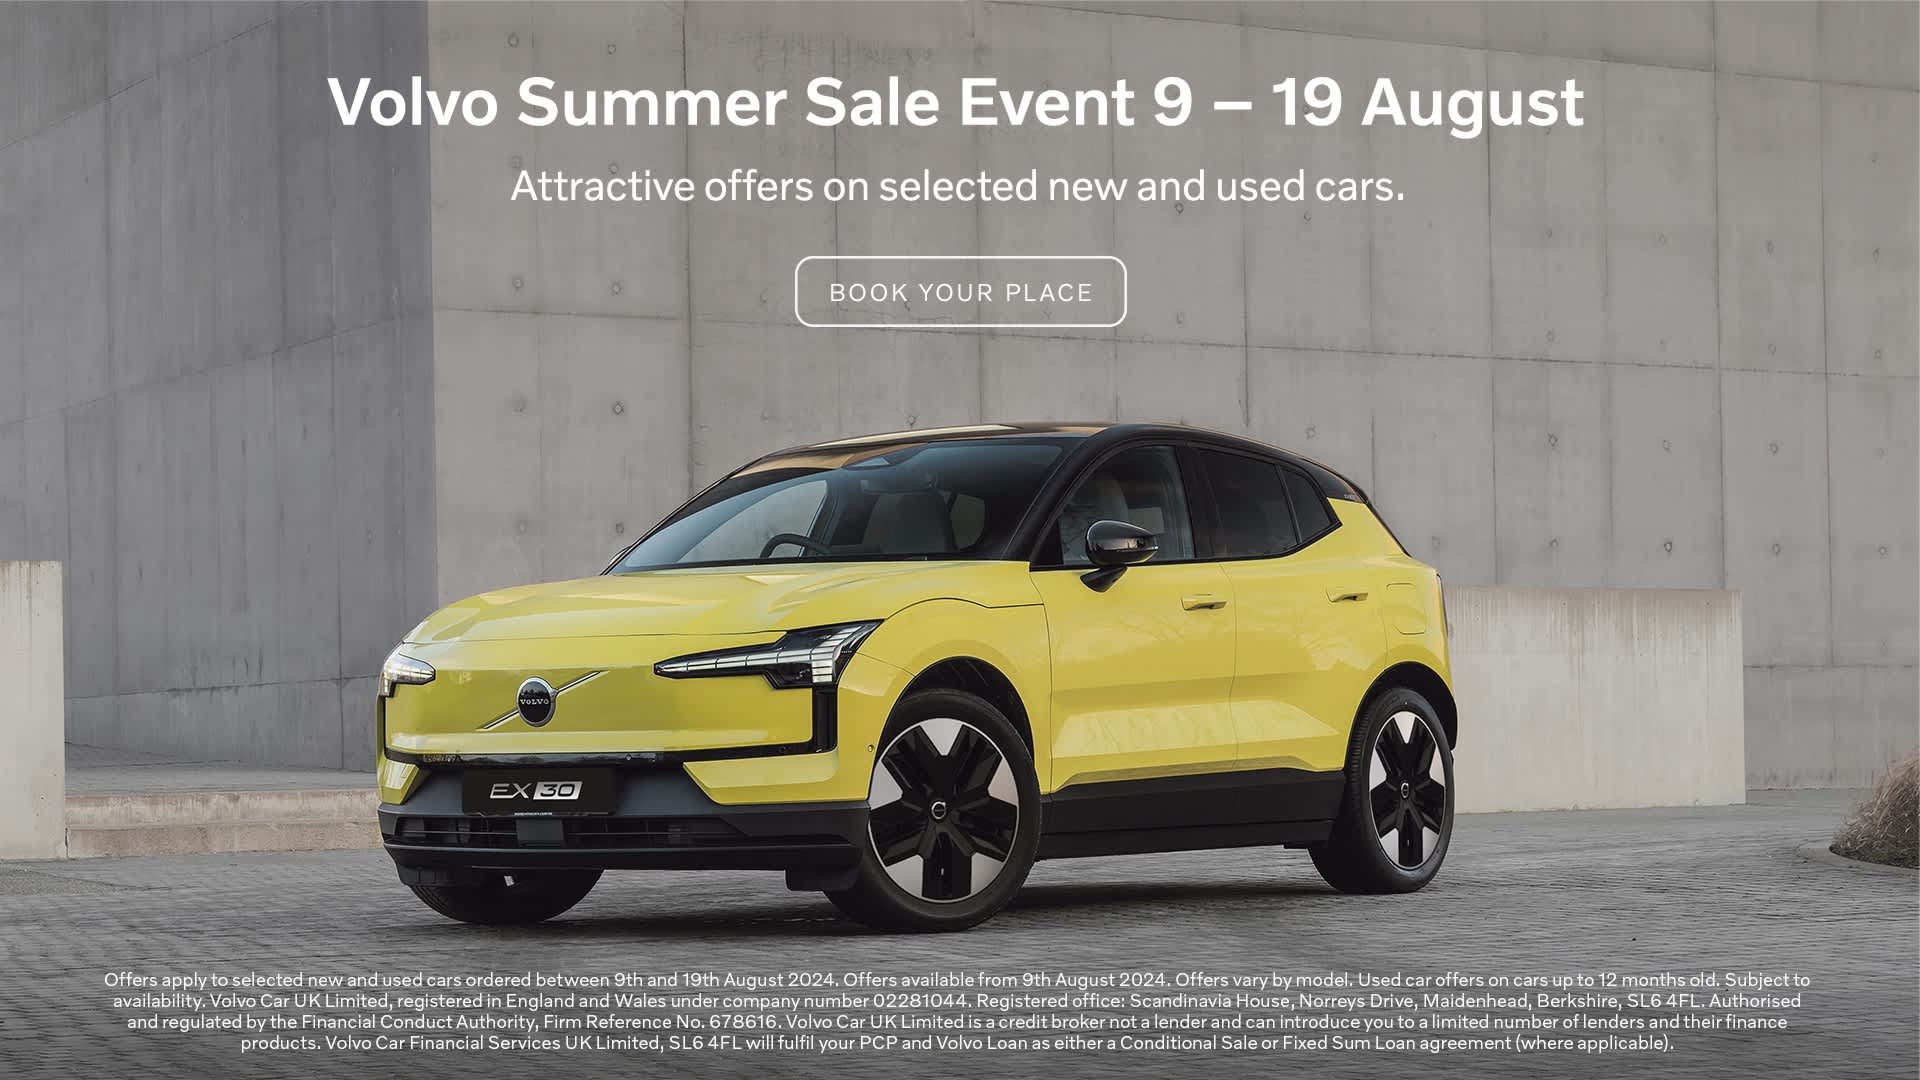 Volvo New Car Sale Event 9 - 19 August 